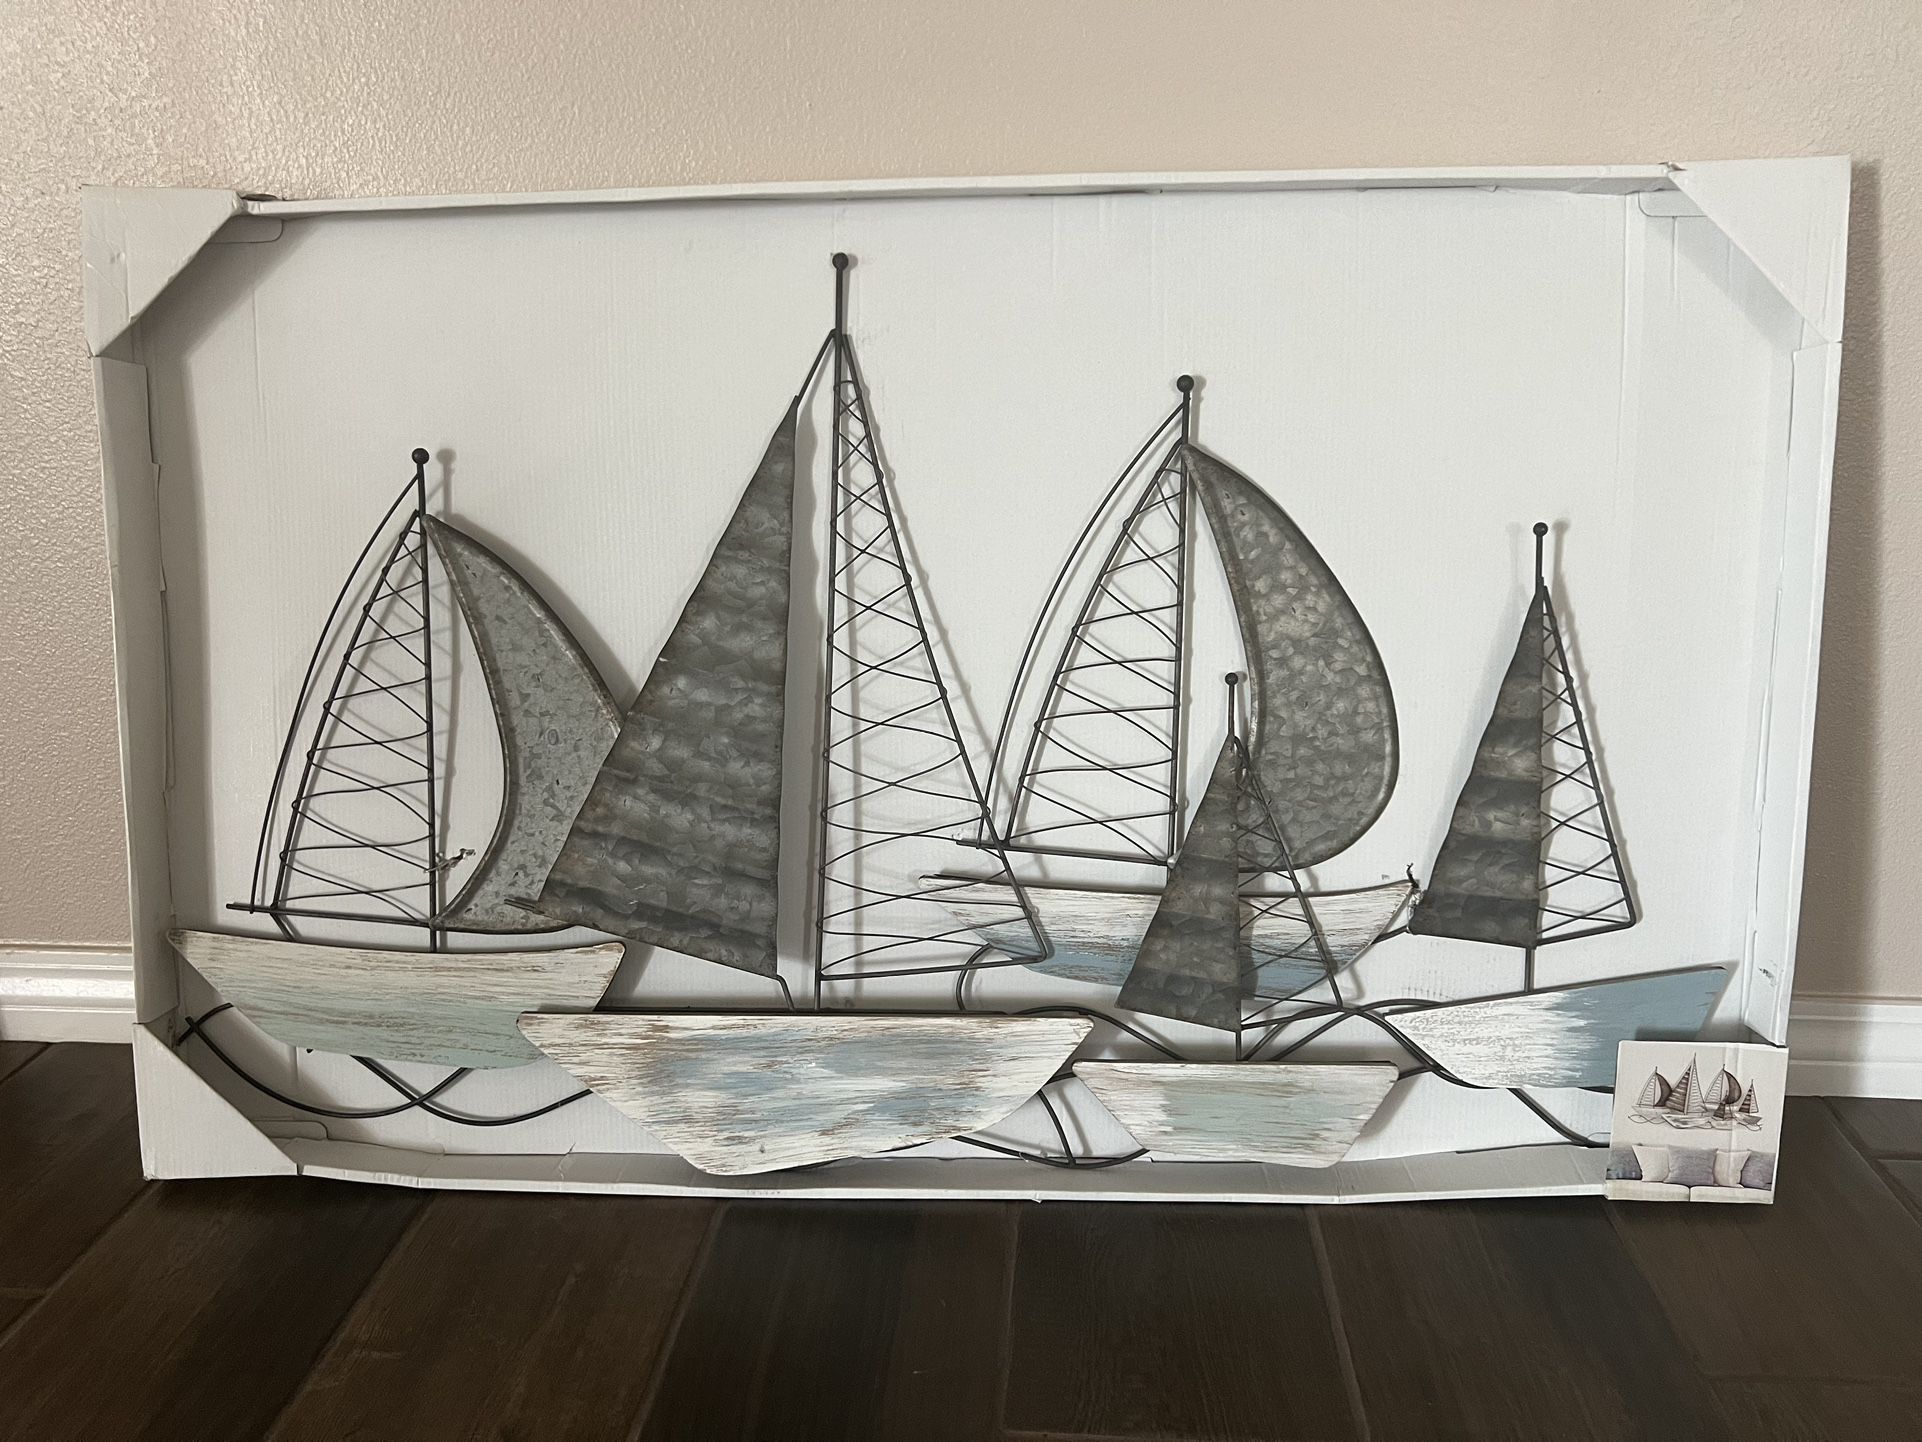 New in box sailing sailboats wall decor . Mental & wood. Measuring approximately 38.5 long & 23 inches tall. $30 firm located in menifee 